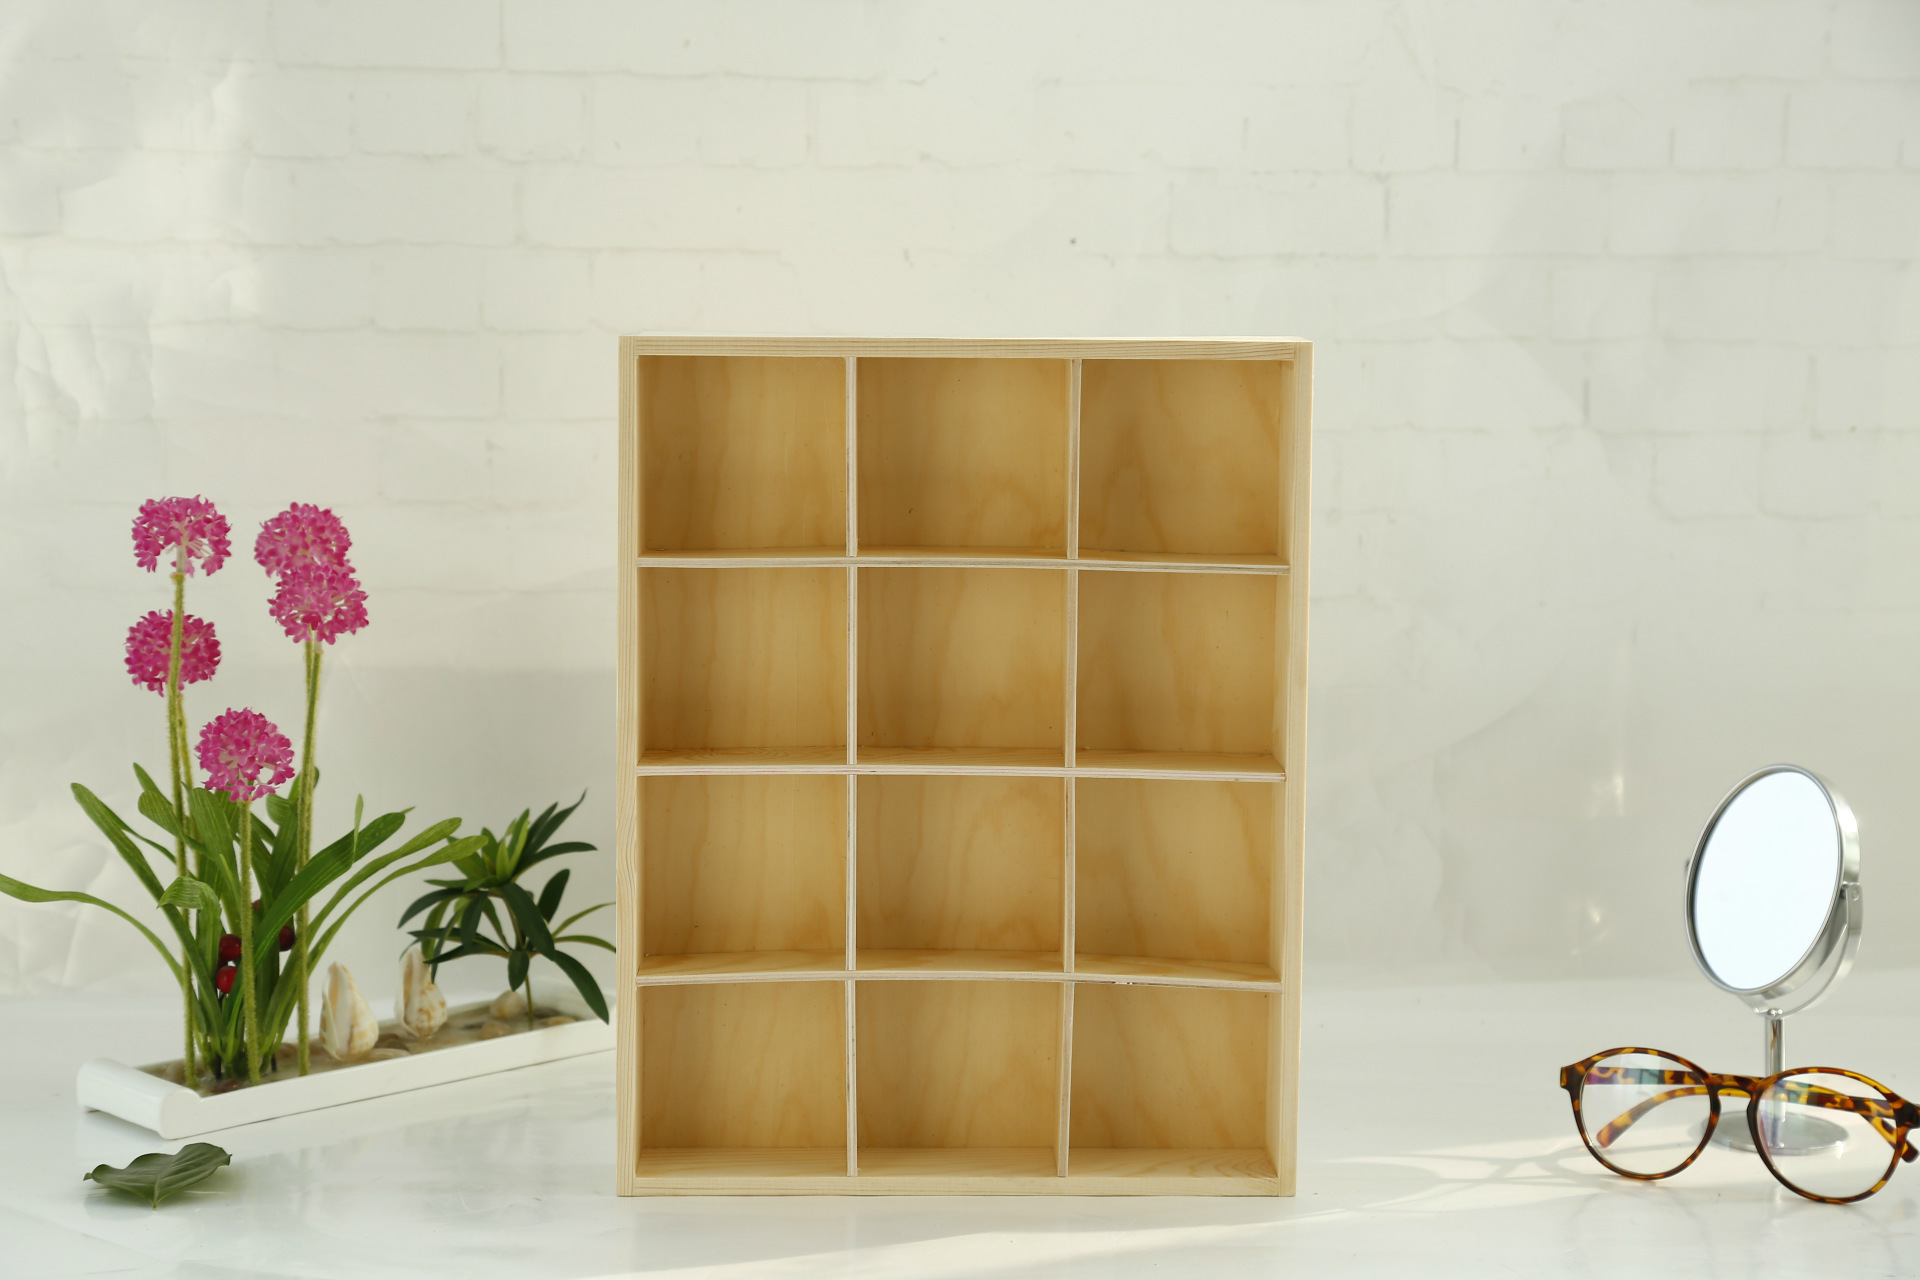 Fashion Household Goods in Stock 20 Grid Cosmetics Storage Box Wooden Distressed Style Remote Control Storage Box